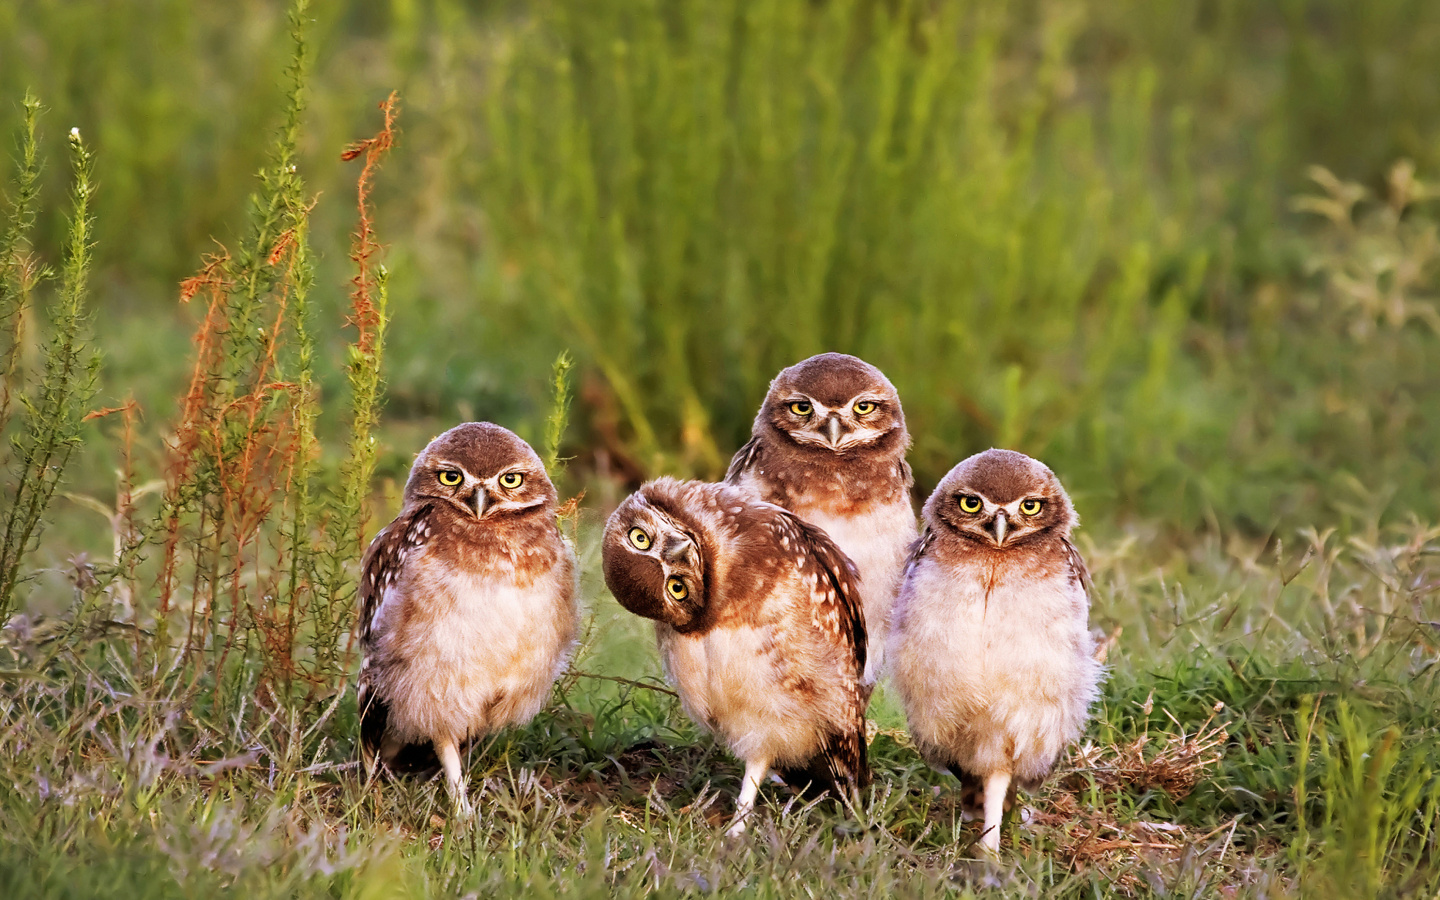 Morning with owls wallpaper 1440x900